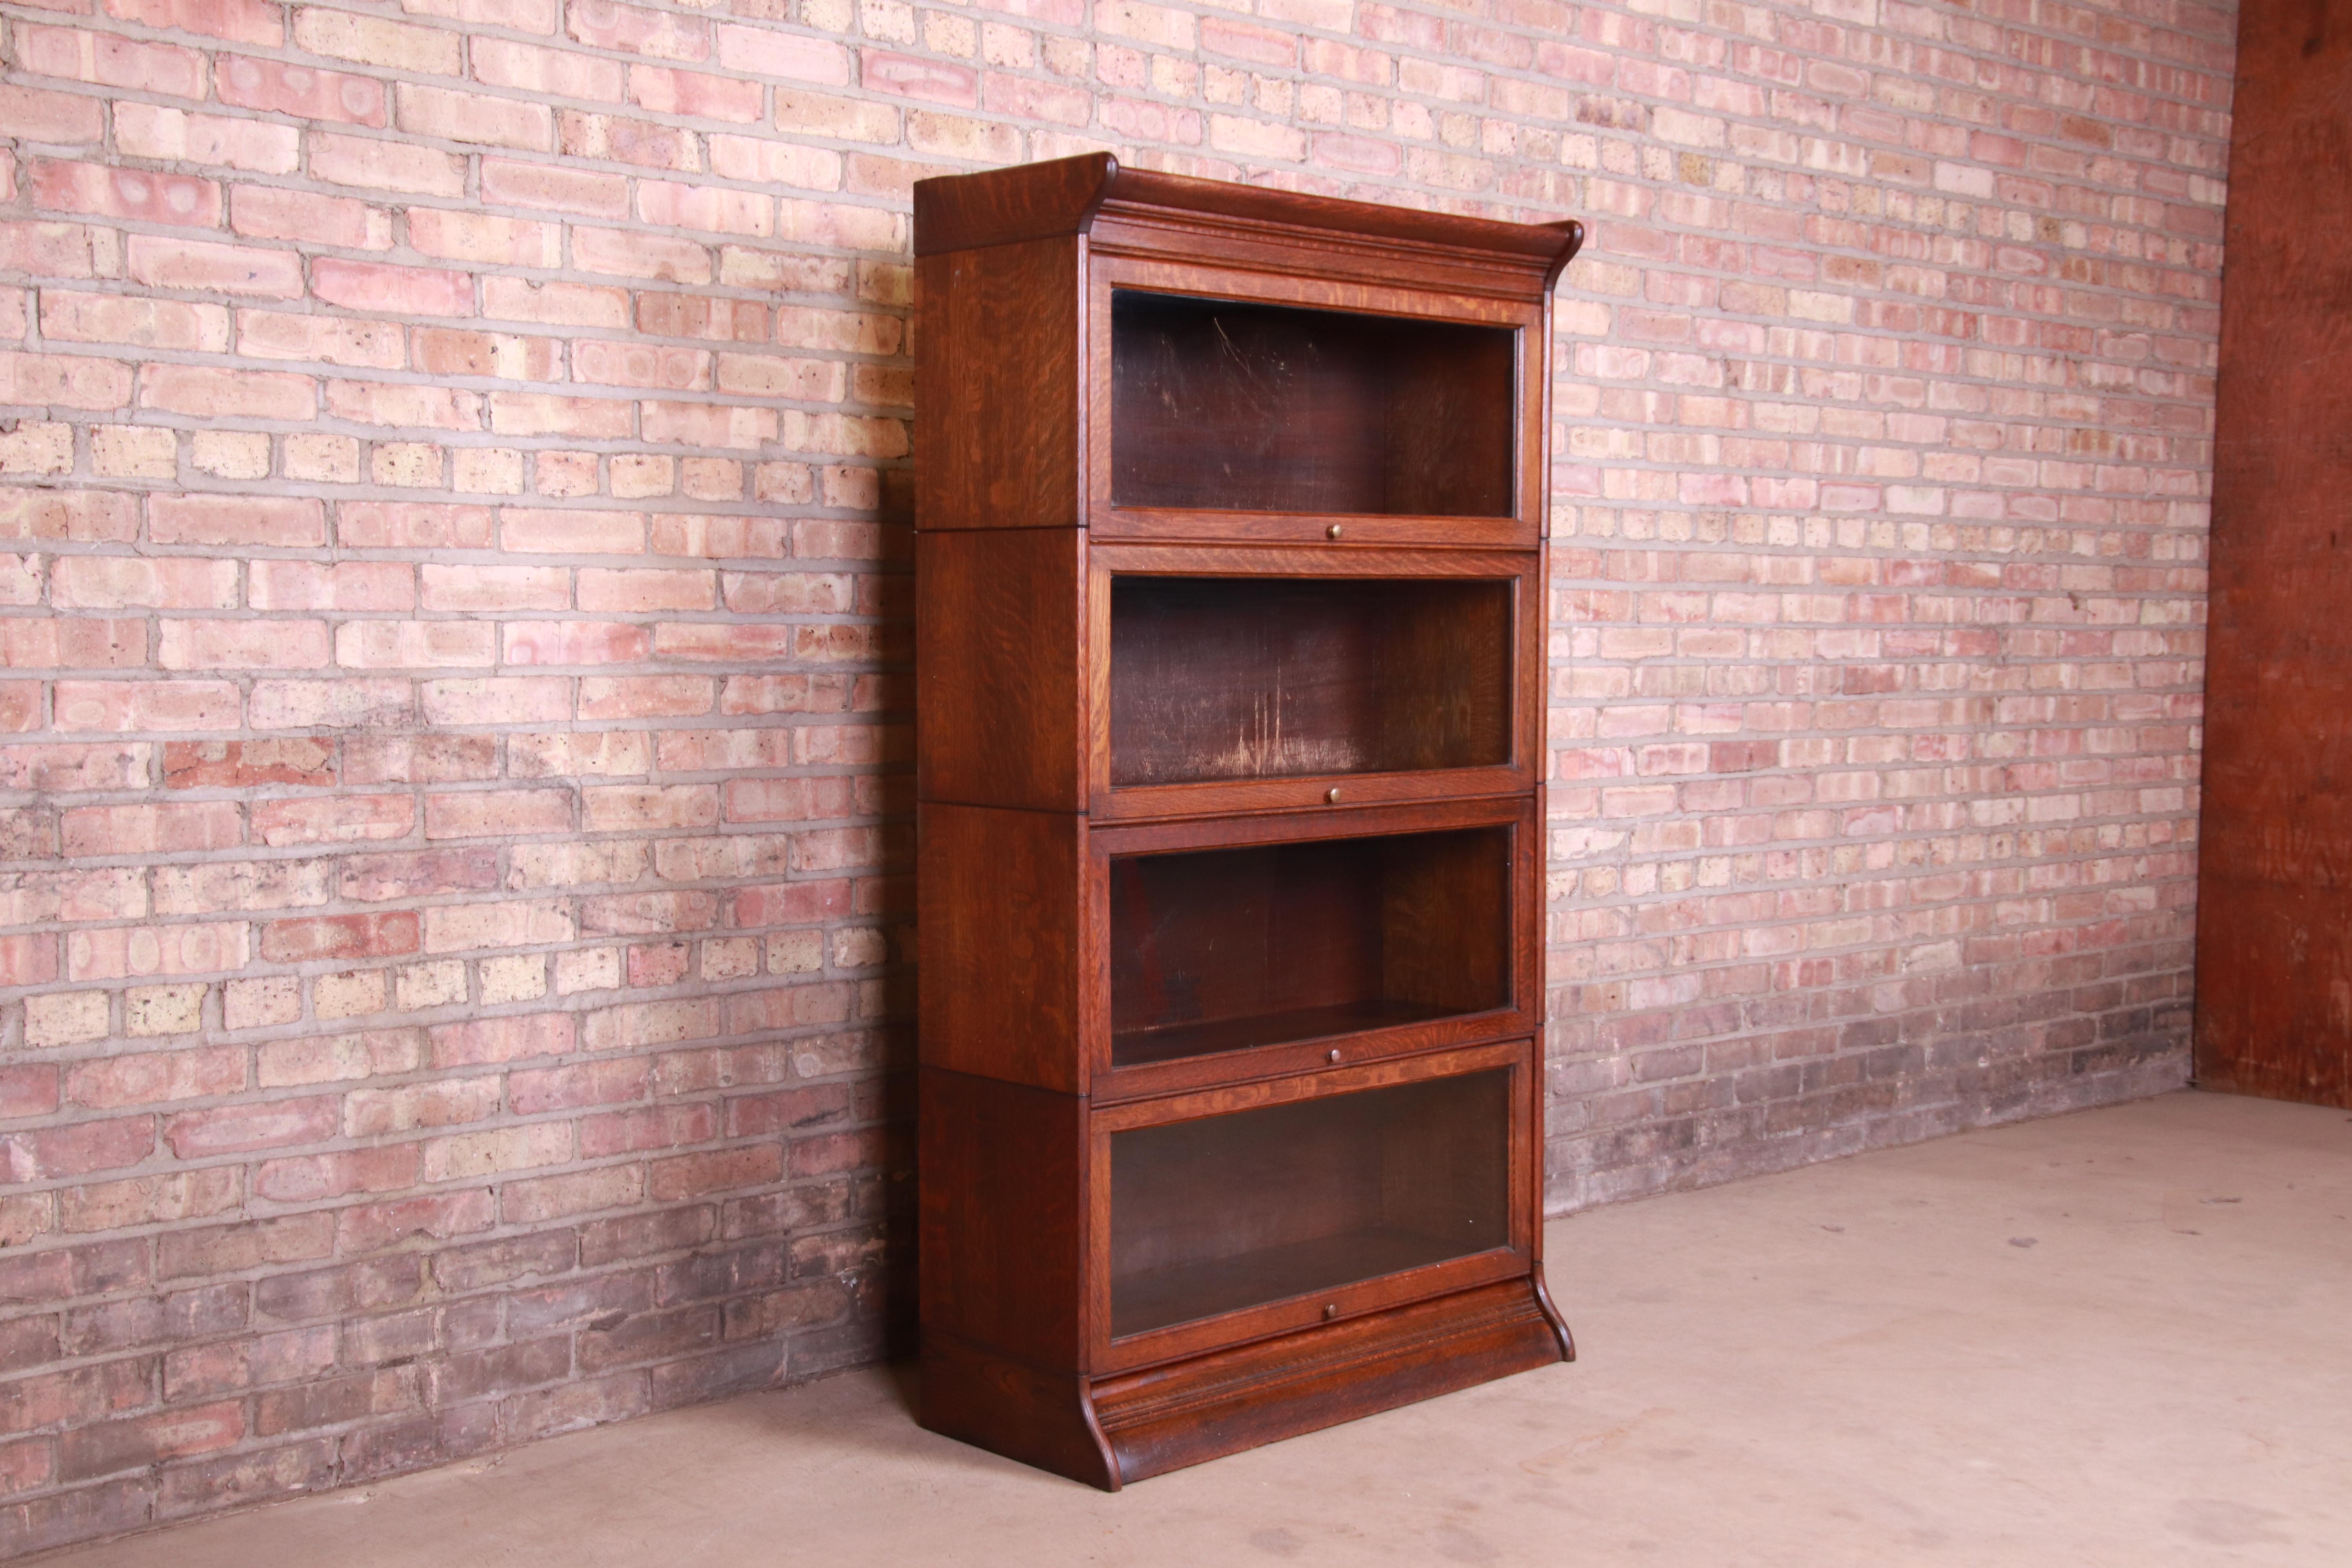 A gorgeous antique Arts & Crafts quartersawn oak four-stack barrister bookcase

Attributed to Gunn Furniture Co.

USA, circa 1920s

Measures: 34.25